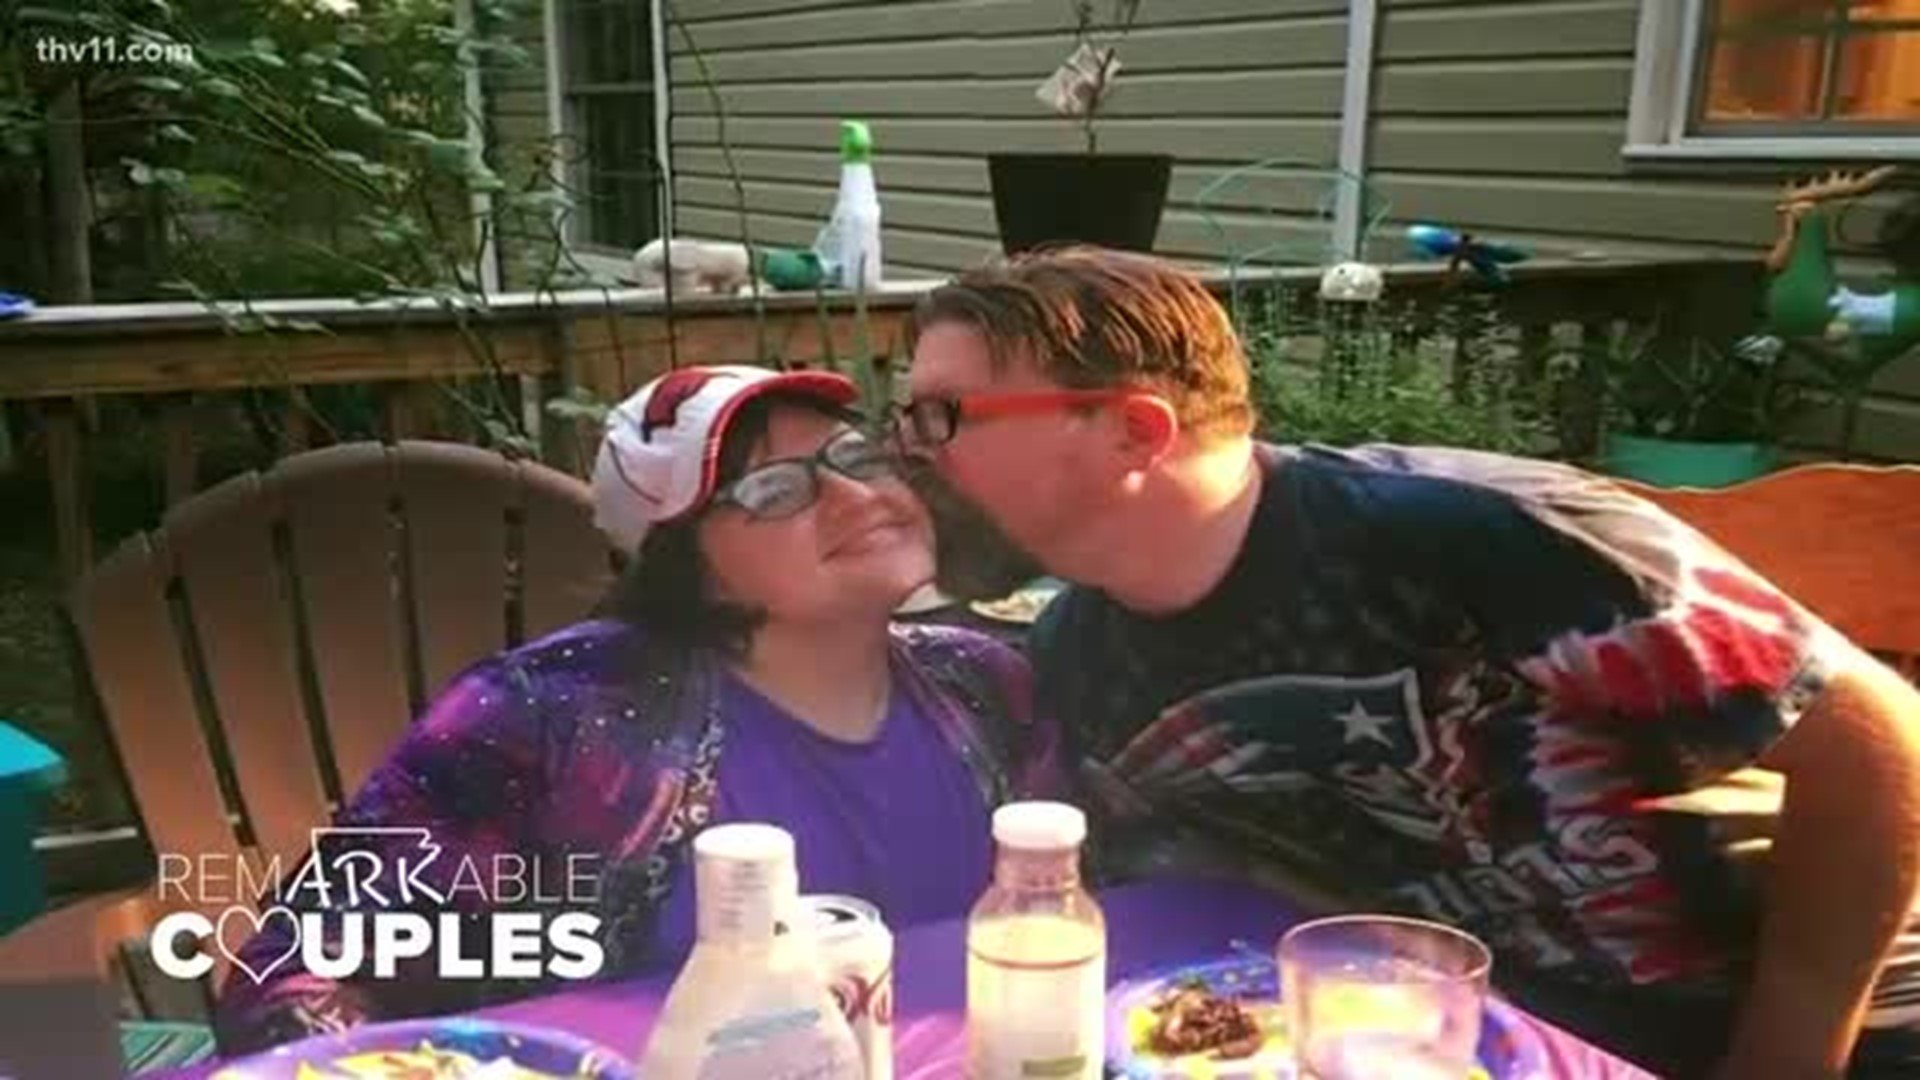 Prom Night Turns Into Proposal 13 Years Later For Developmentally Disabled Arkansas Couple